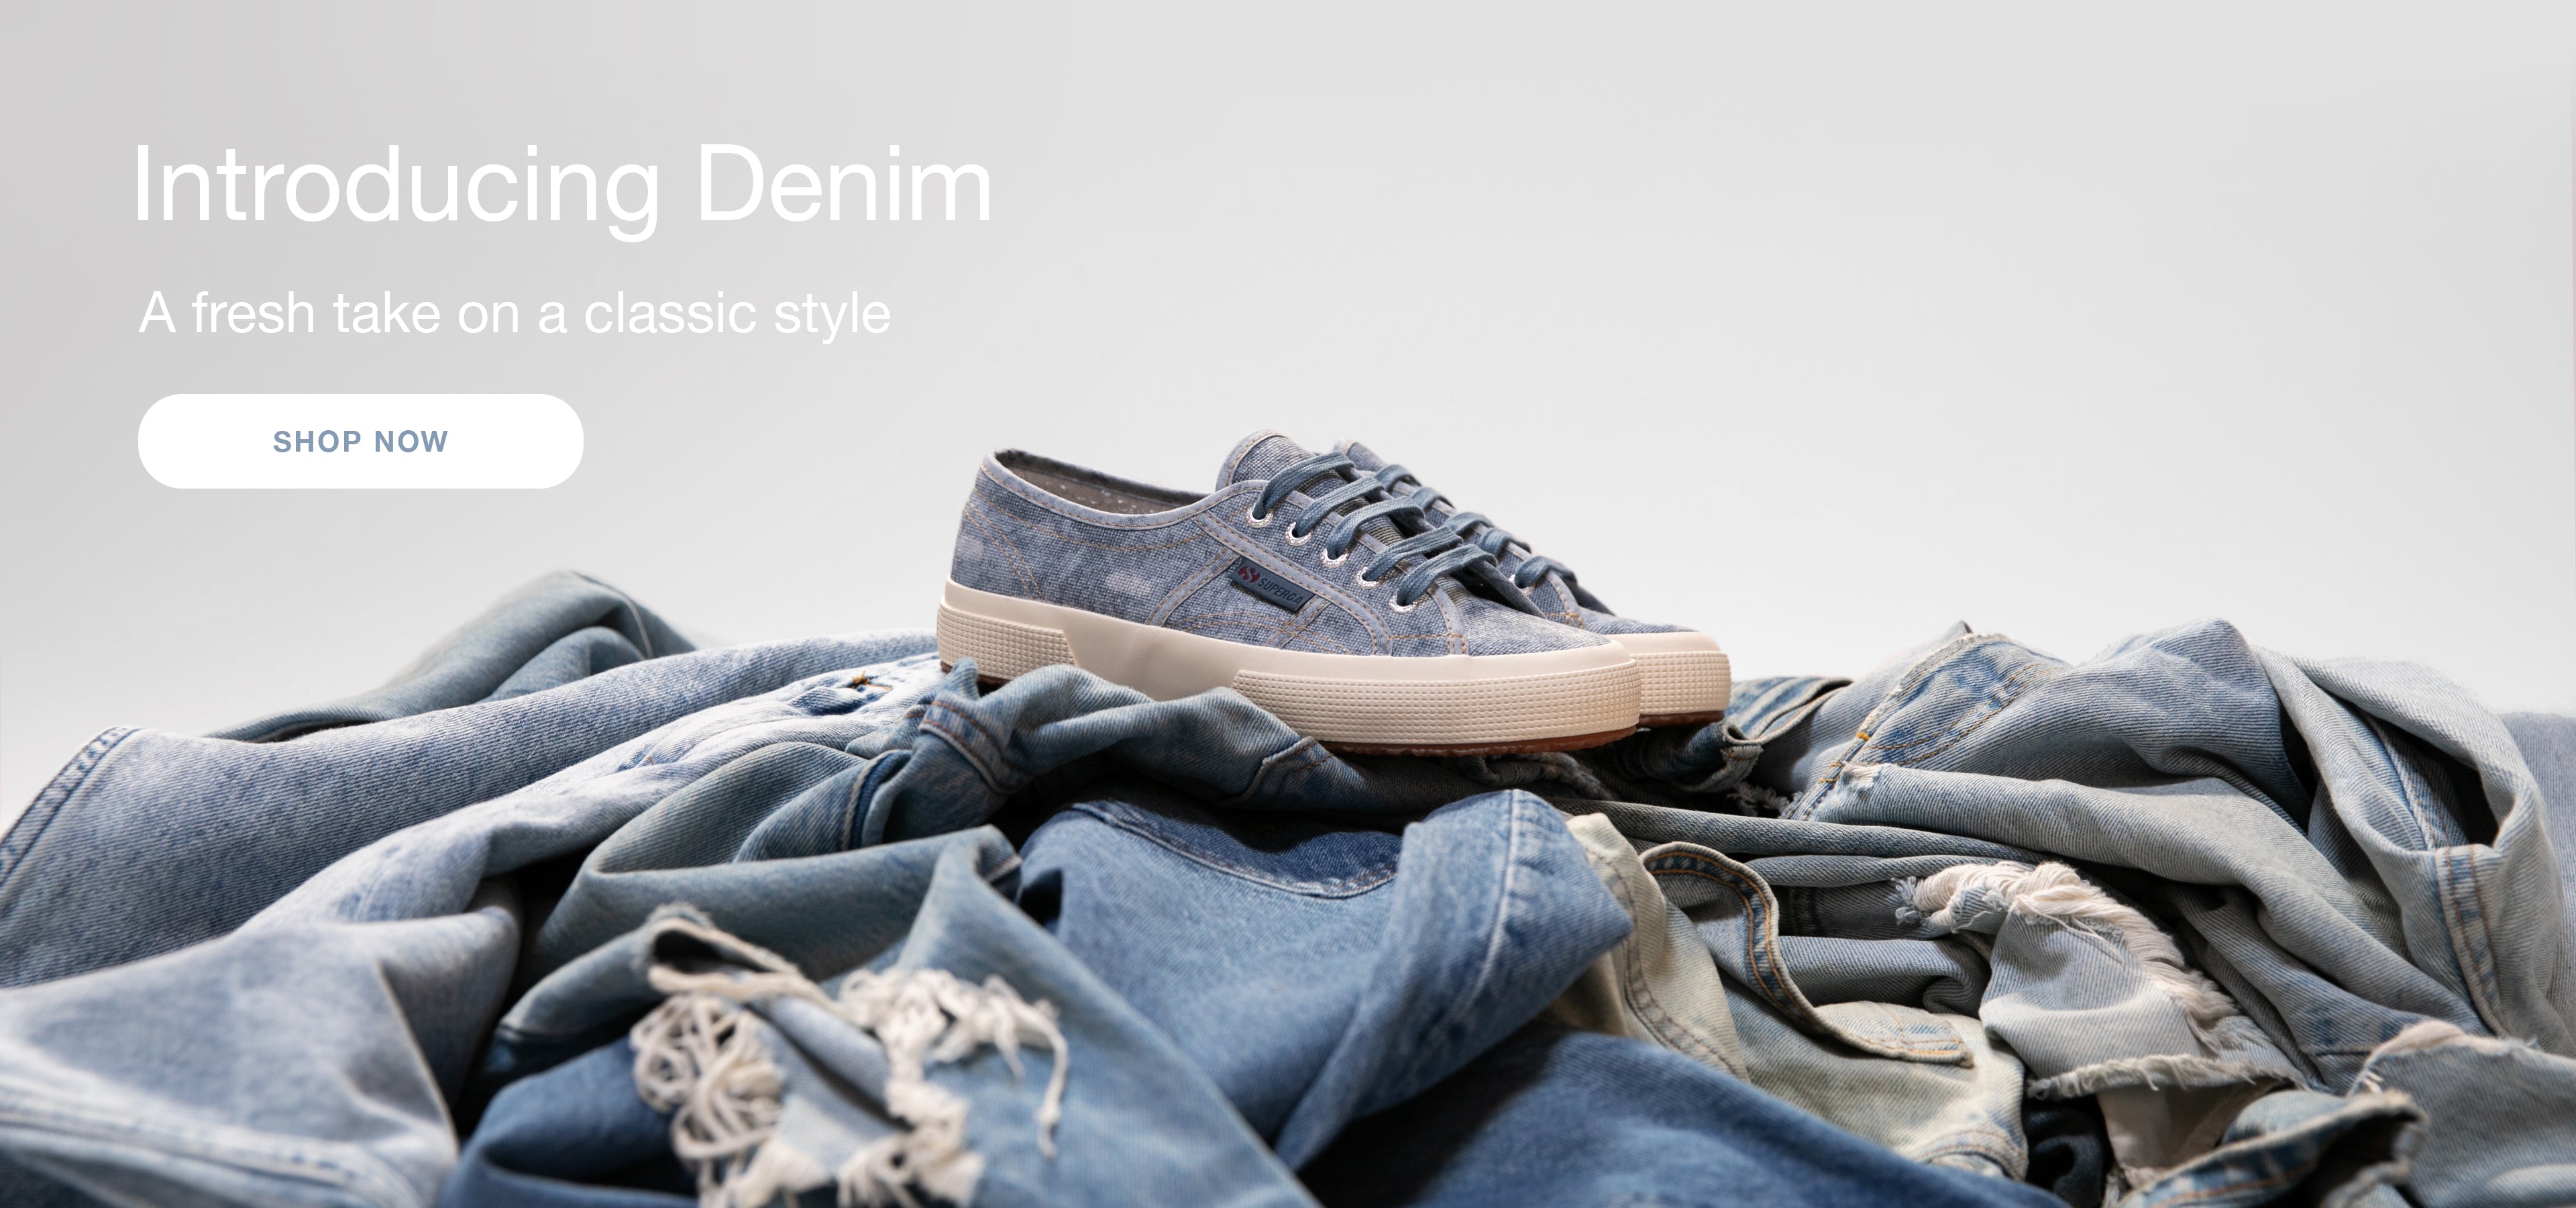 Introducing Denim. A fresh take on a classic style. Click to shop now.